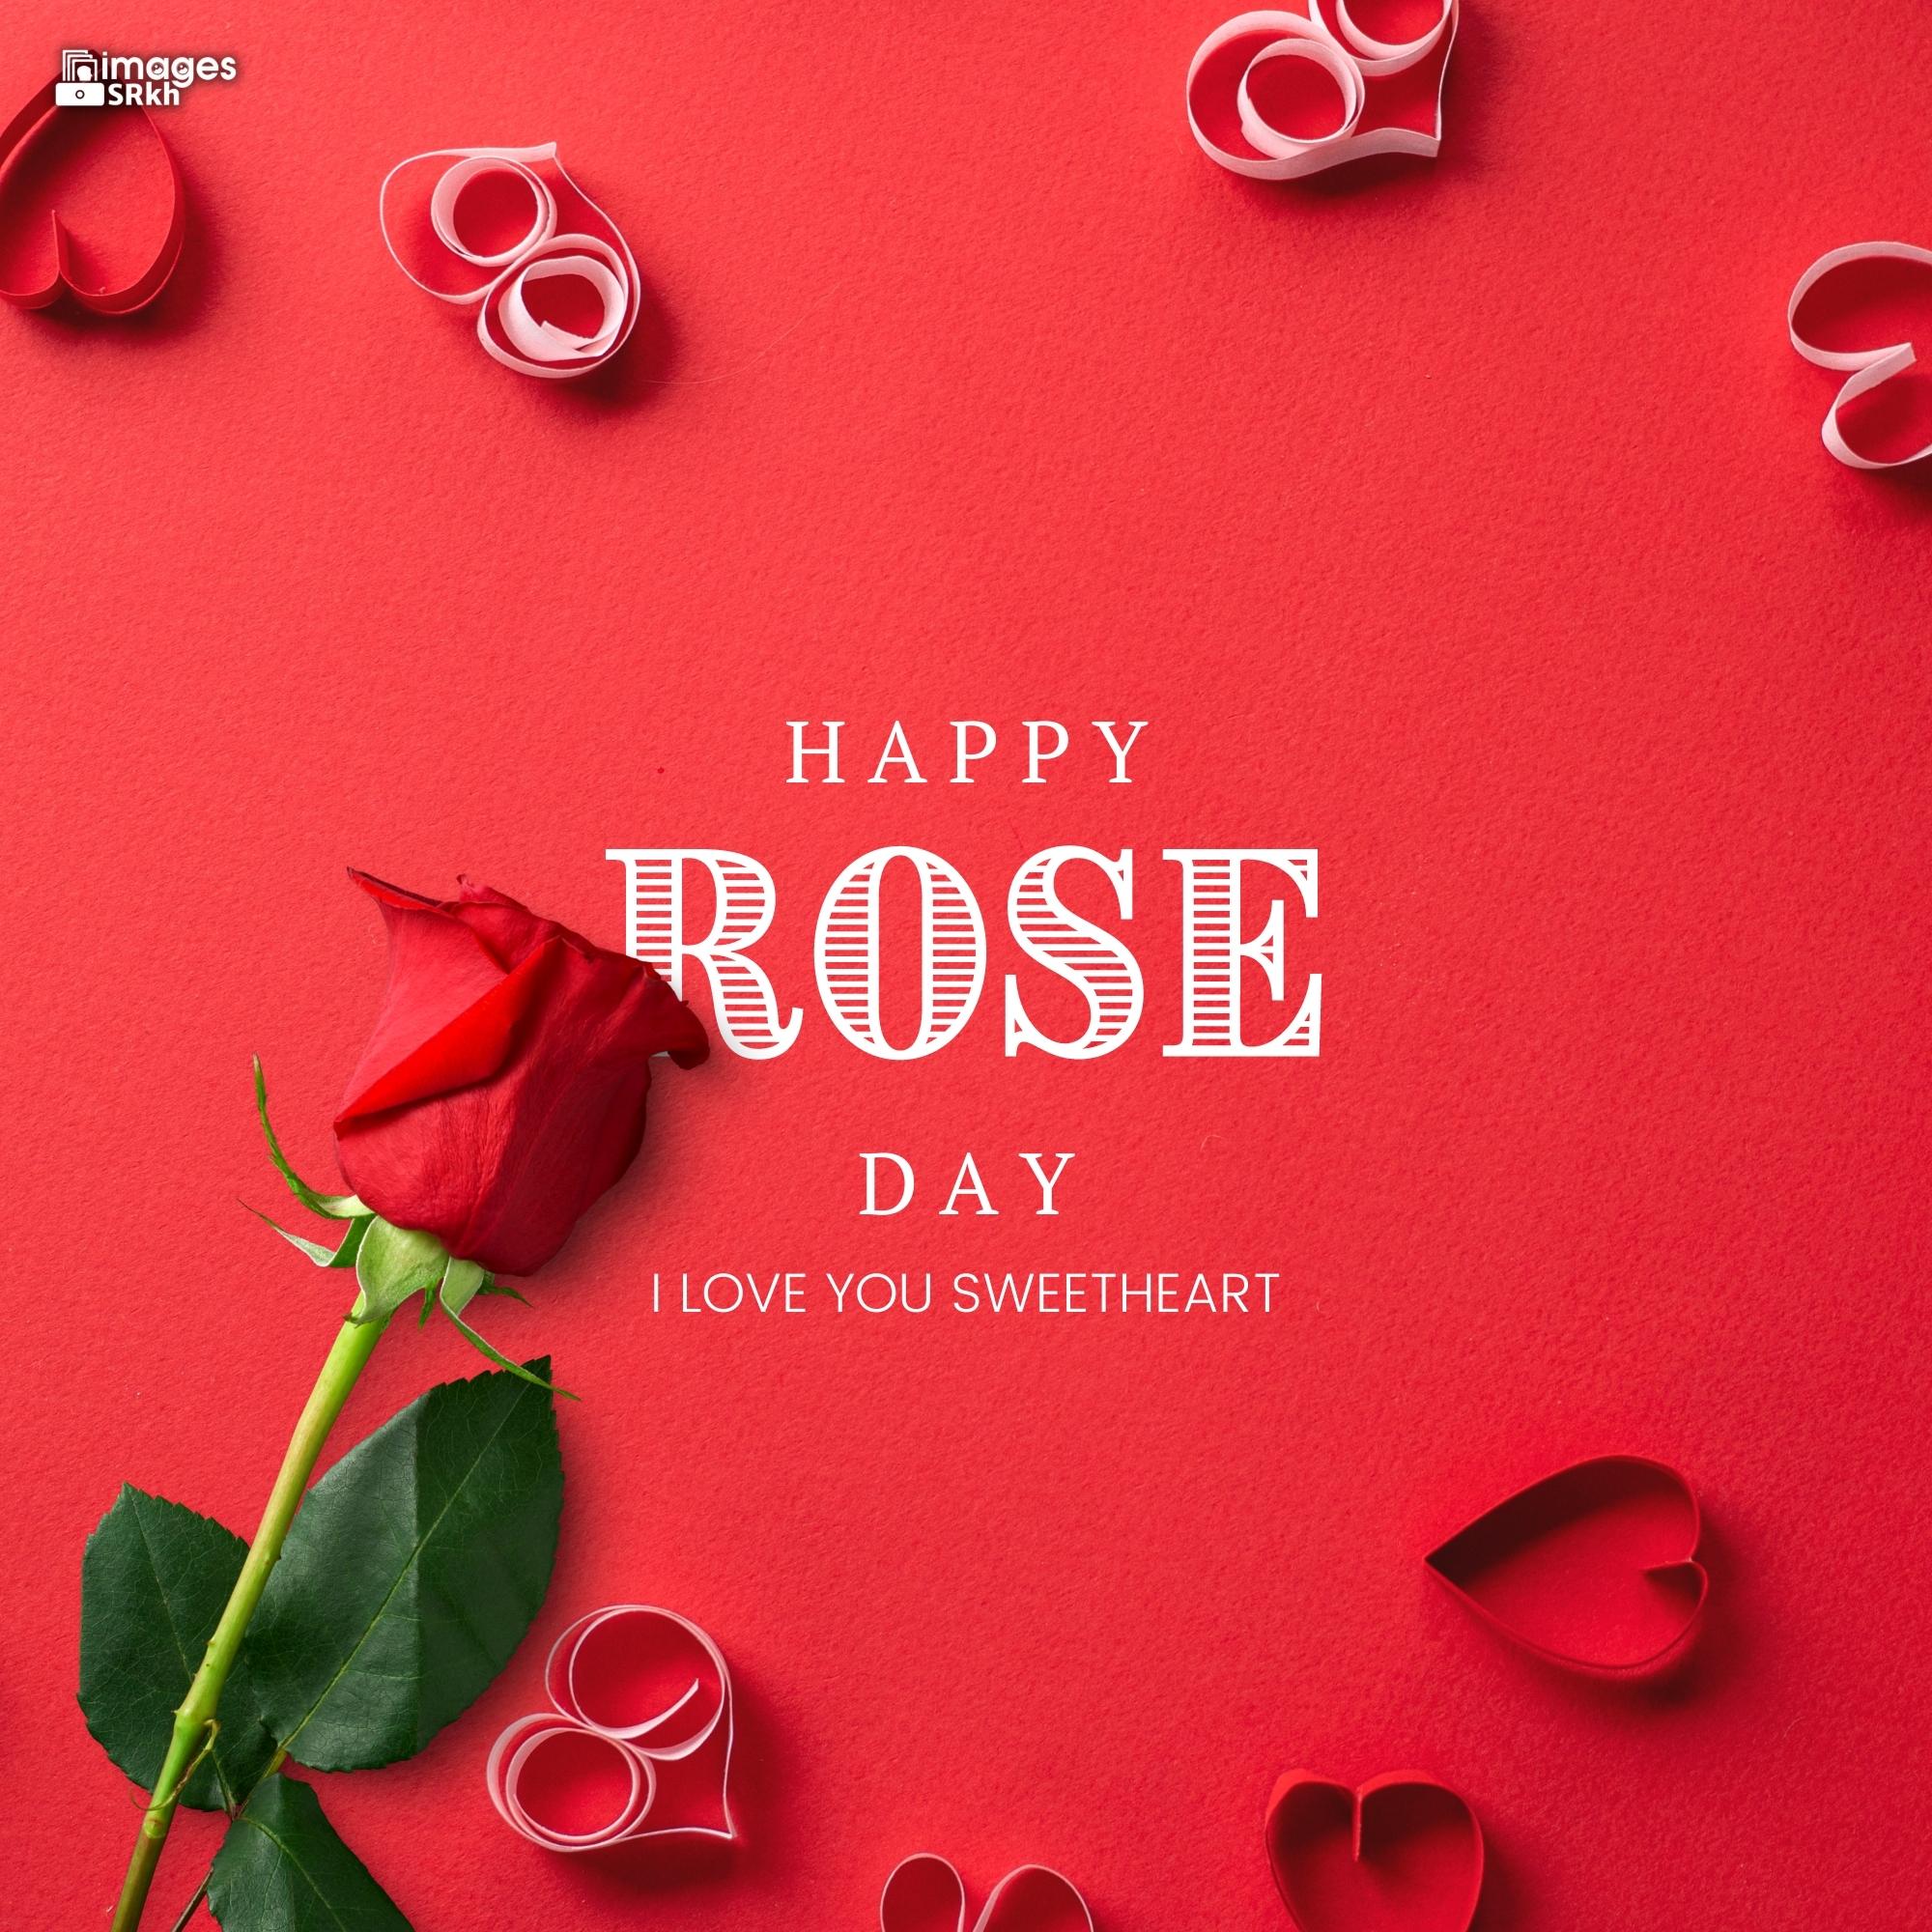 Happy Rose Day Image Hd Download (71)